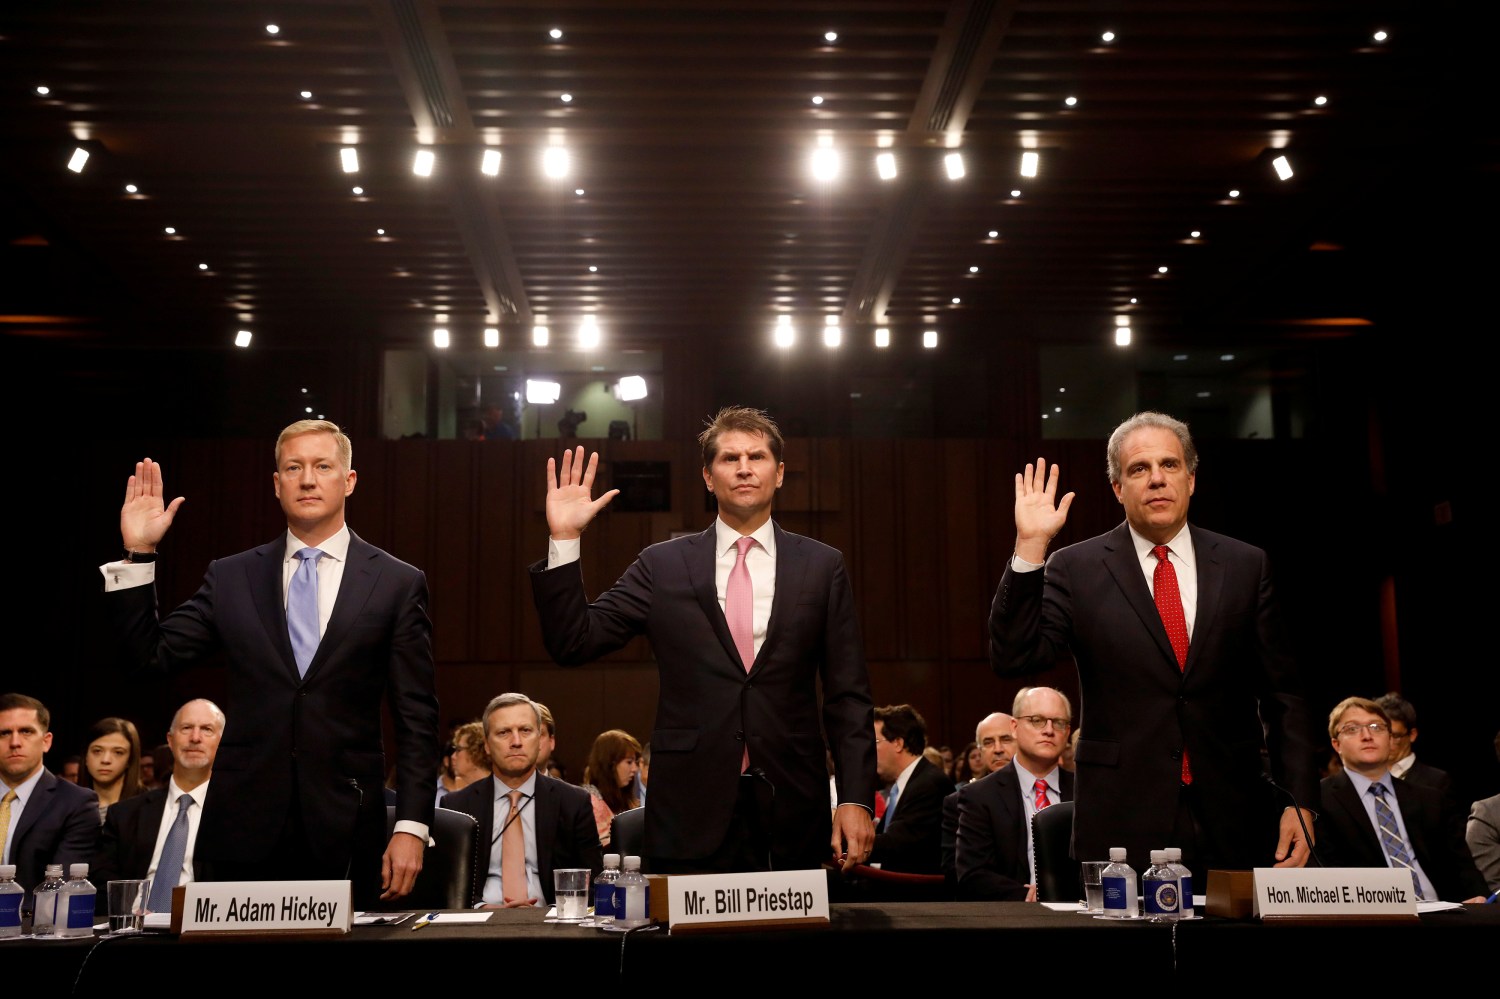 Deputy Assistant Attorney General Adam Hickey, Bill Priestap, assistant director of the FBI's Counterintelligence Division, and Justice Department Inspector General Michael Horowitz are sworn in during a Judiciary Committee hearing into alleged Russian meddling in the 2016 election on Capitol Hill in Washington, U.S., July 26, 2017. REUTERS/Aaron P. Bernstein - RC14DA9ED4D0